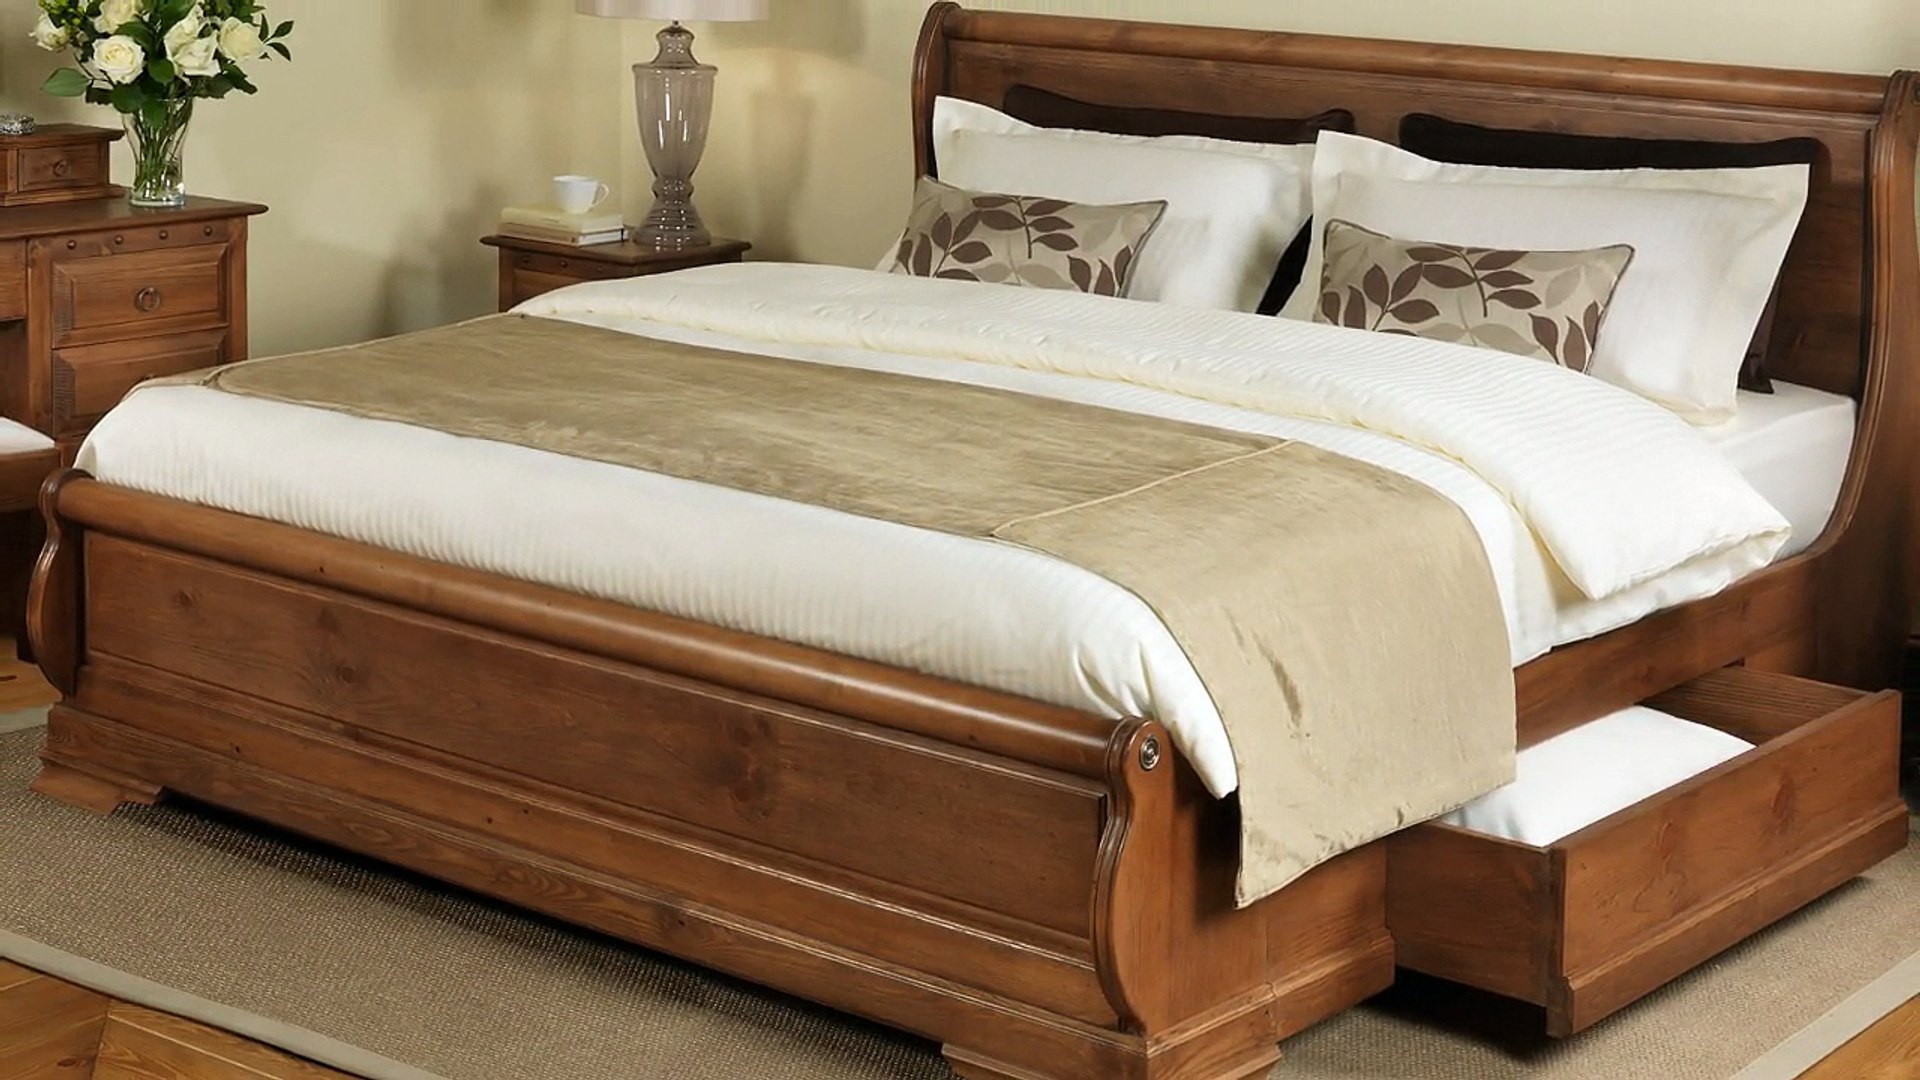 Featured image of post Wooden King Bed Frame With Headboard - Beds spindle beds storage beds traditional beds trundle beds fabric faux leather hardwood laminate metal plastic plywood polyester steel wicker wood wood composite twin twin xl full/queen king california king beige black blue brown clear.